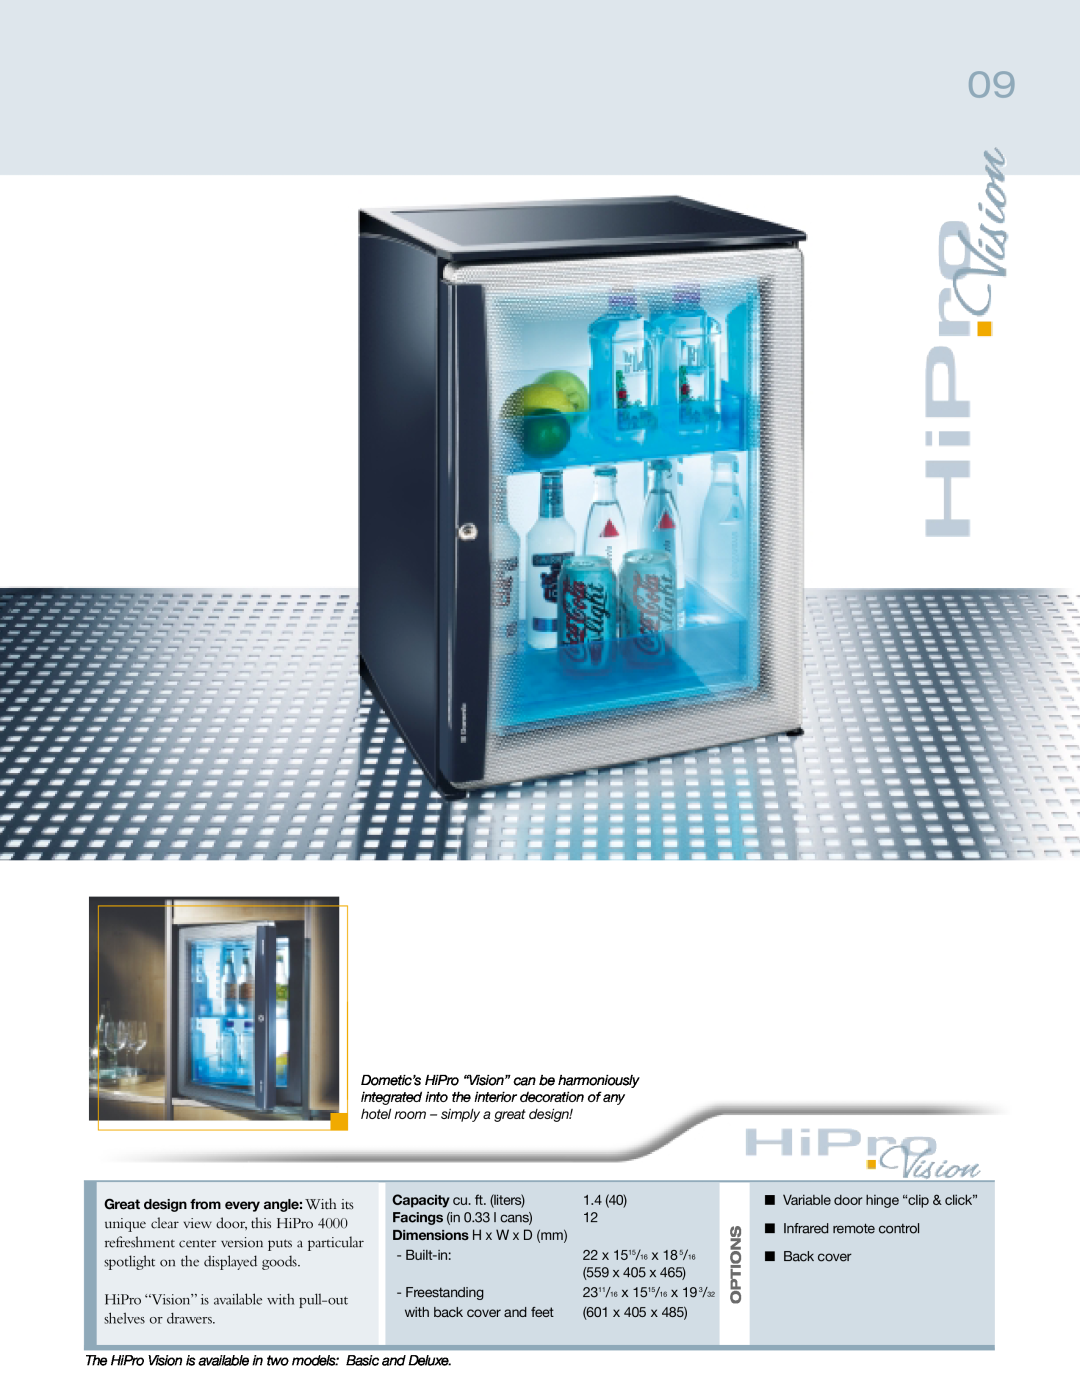 Dometic 6000 manual HiPro “Vision” is available with pull-out shelves or drawers, Options 